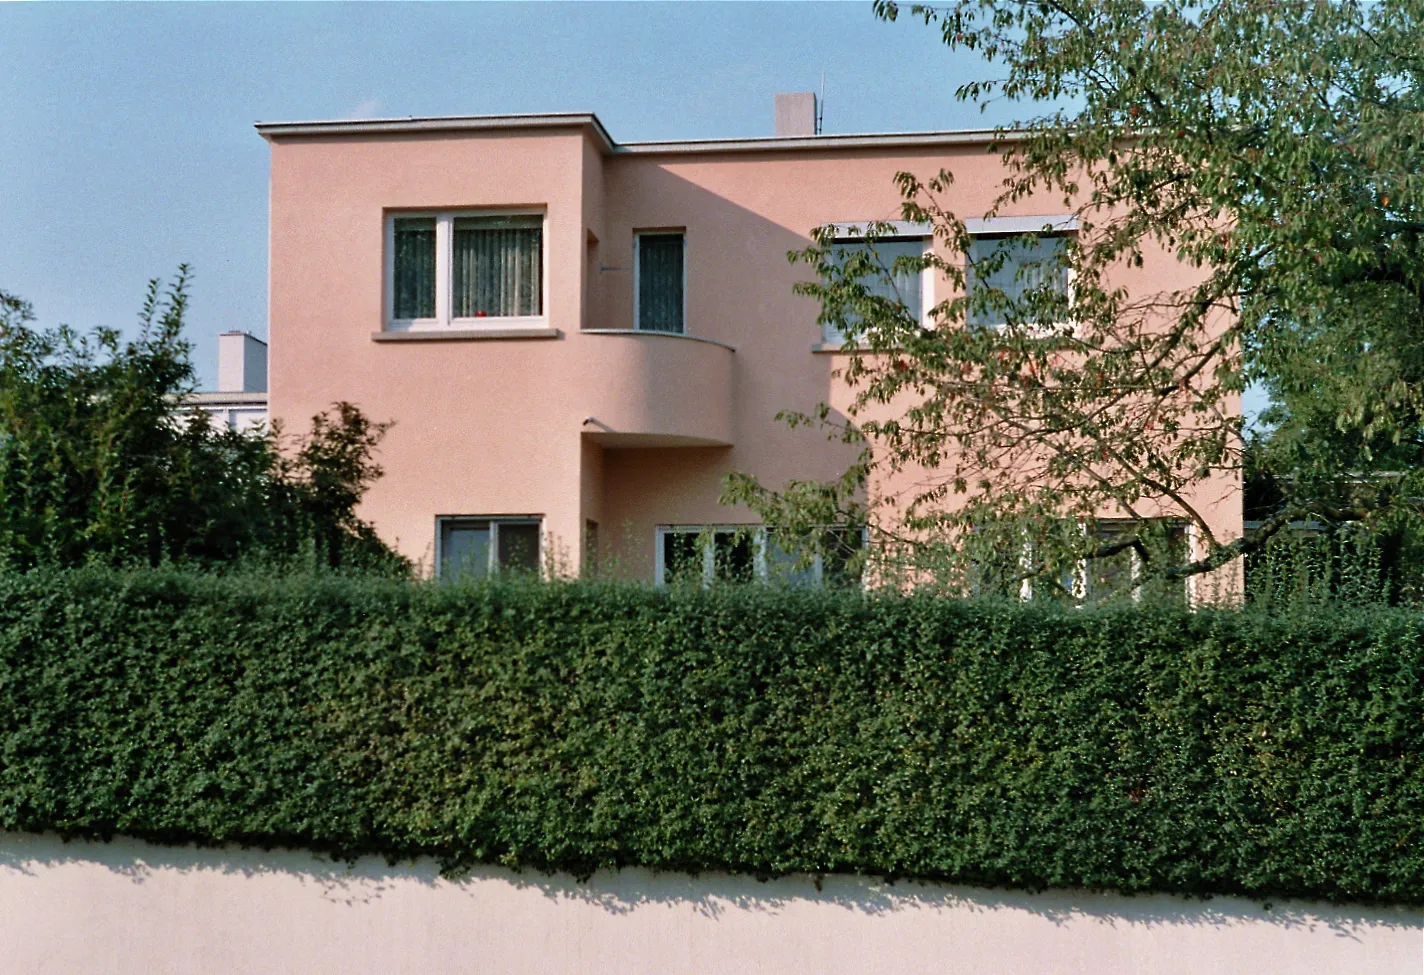 Photo showing: Stuttgart, Weissenhofsiedlung, house by Victor Bourgeois. 1927, international style.